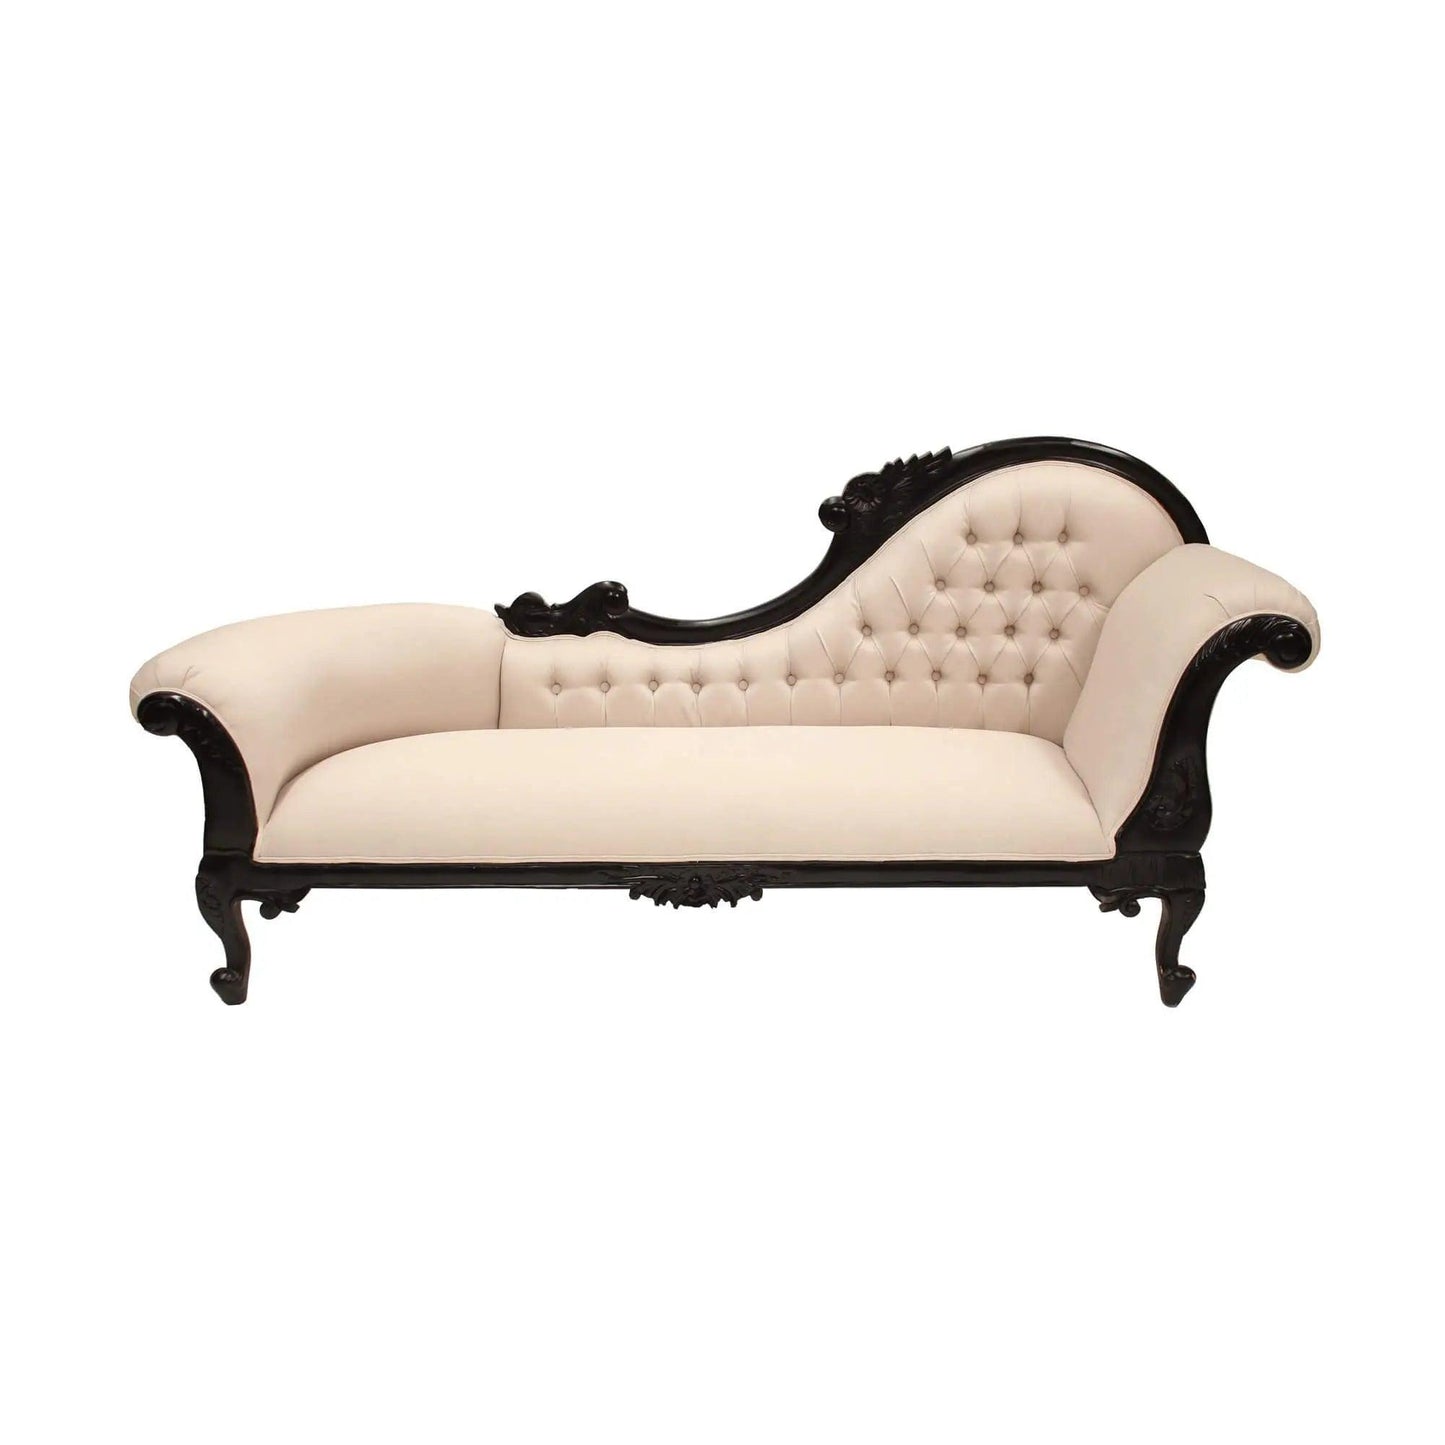 Right Side High Large Carved Chaise Lounge - SofasMCHA108RBDR9360245001011 5